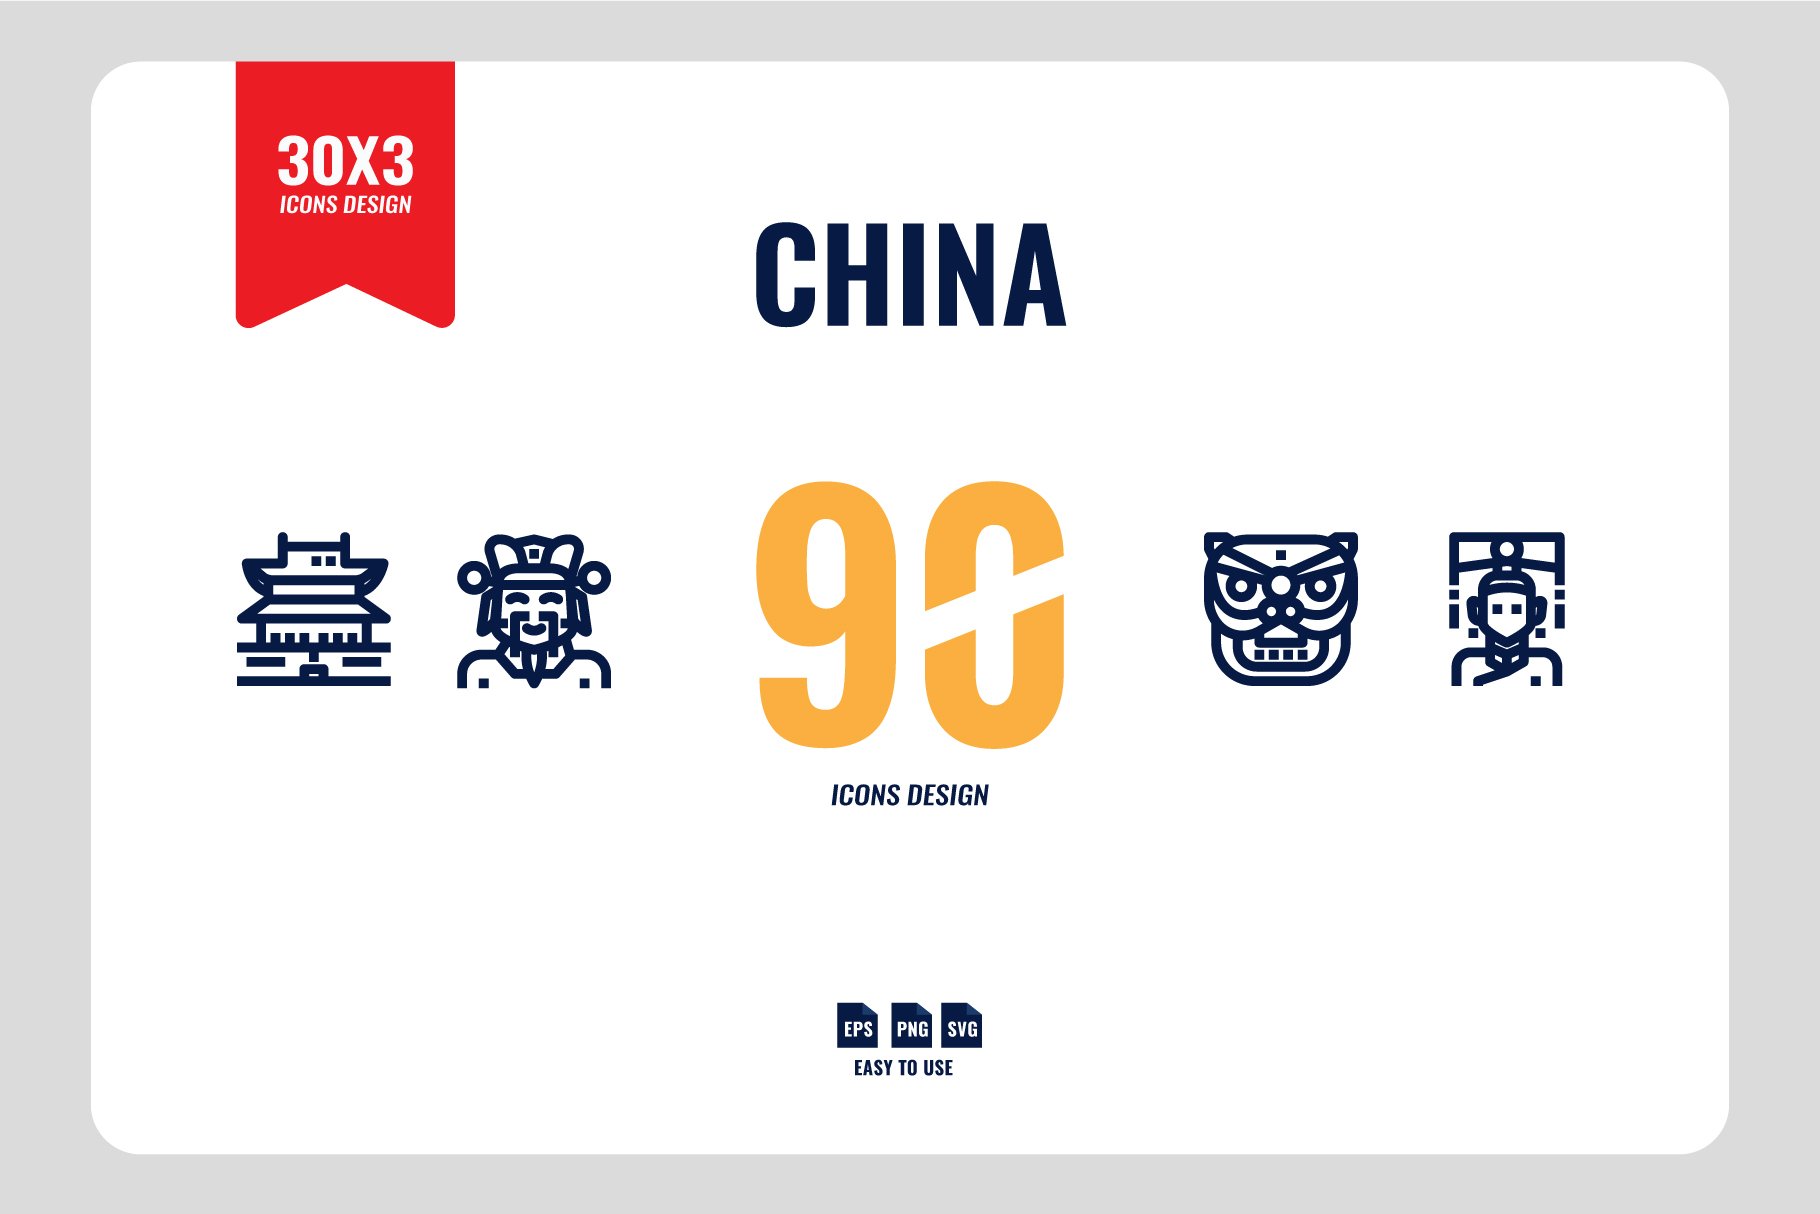 China 90 Icons cover image.